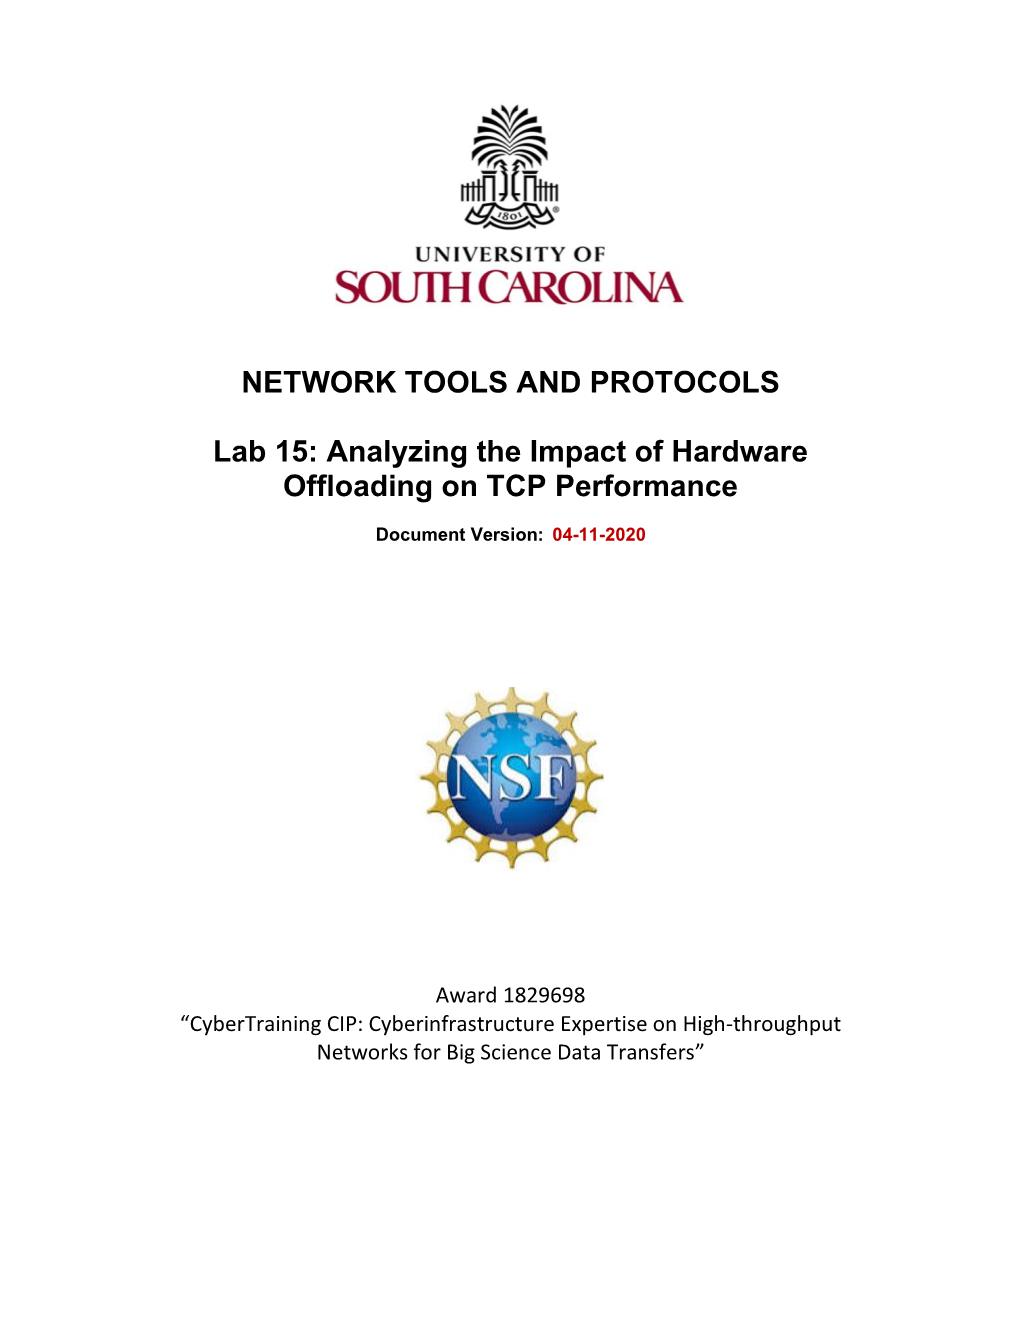 Lab 15: Analyzing the Impact of Hardware Offloading on TCP Performance